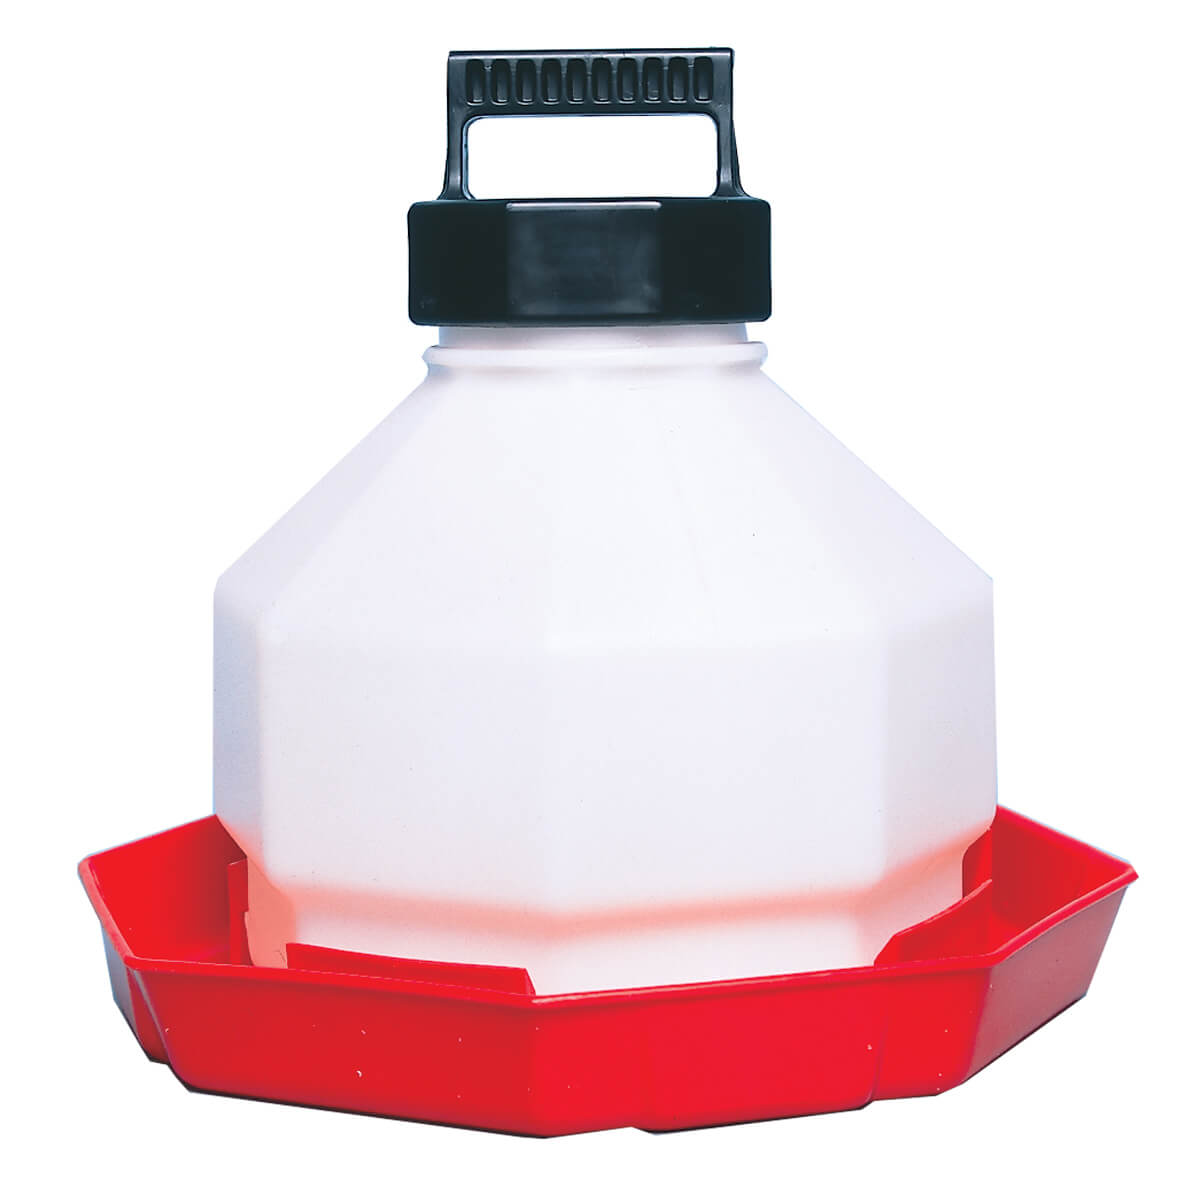 Plastic Poultry Waterer - 3 gal